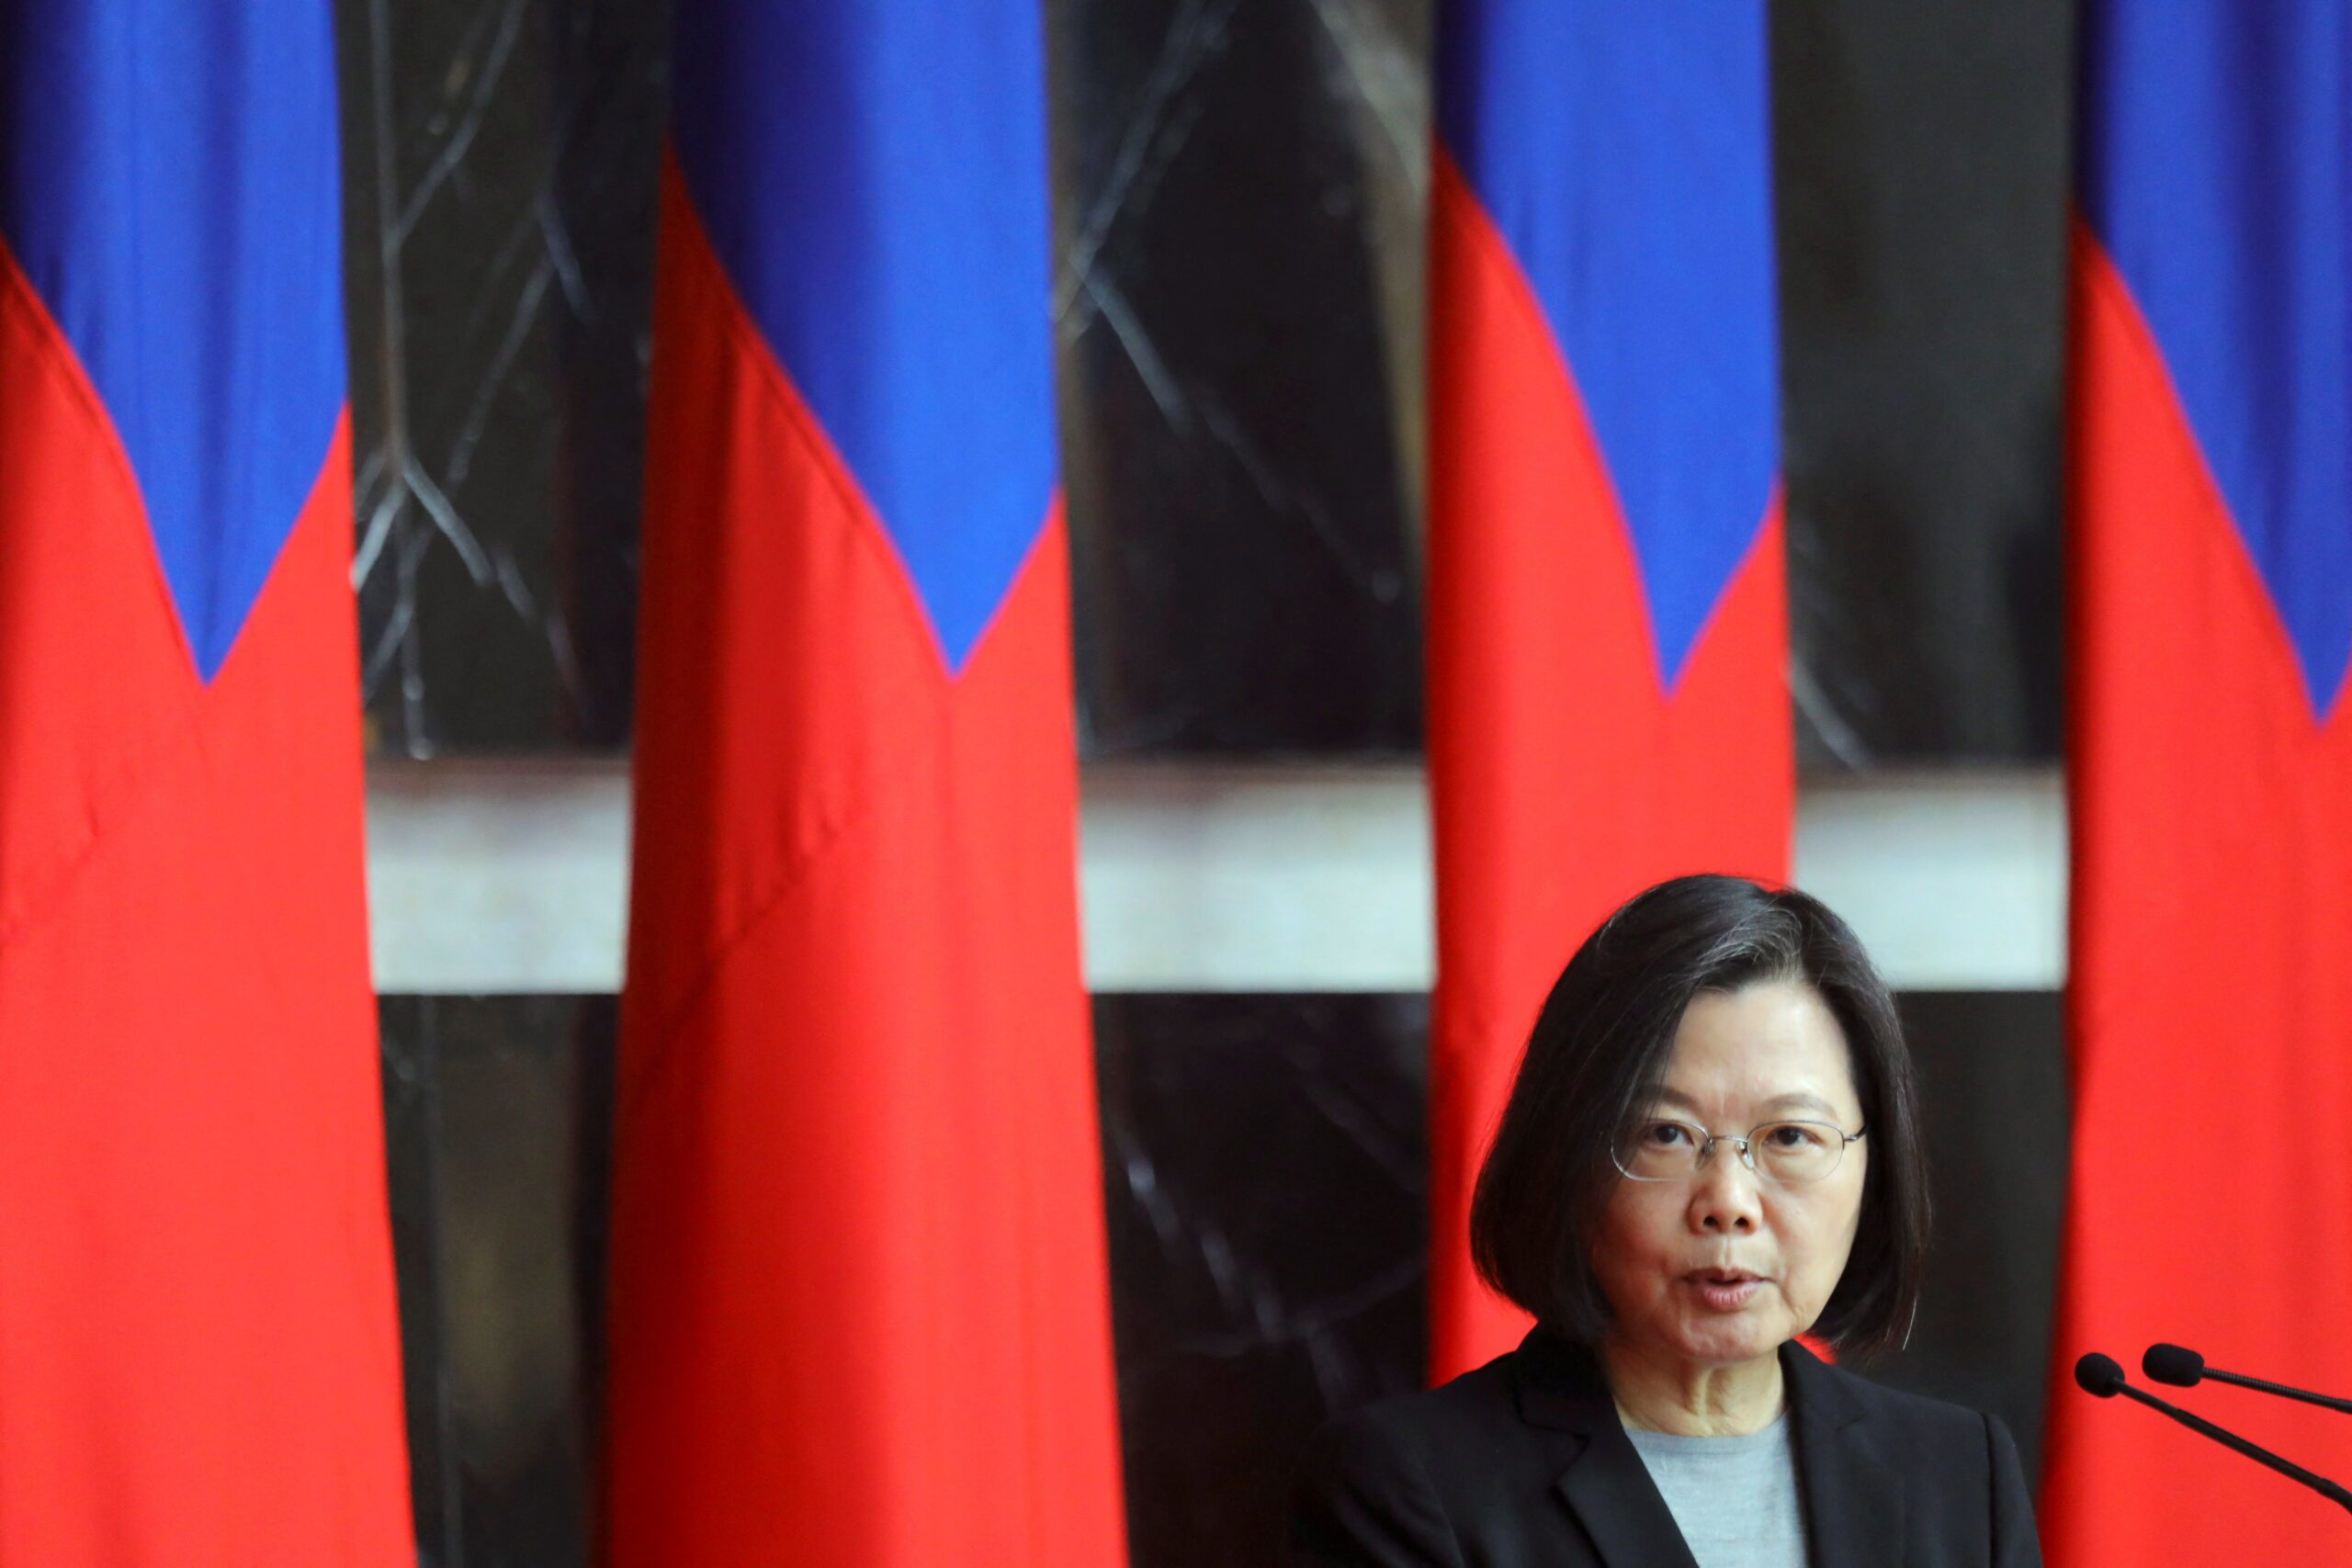 In New Year’s speech, Taiwan president warns China against ‘military adventurism’